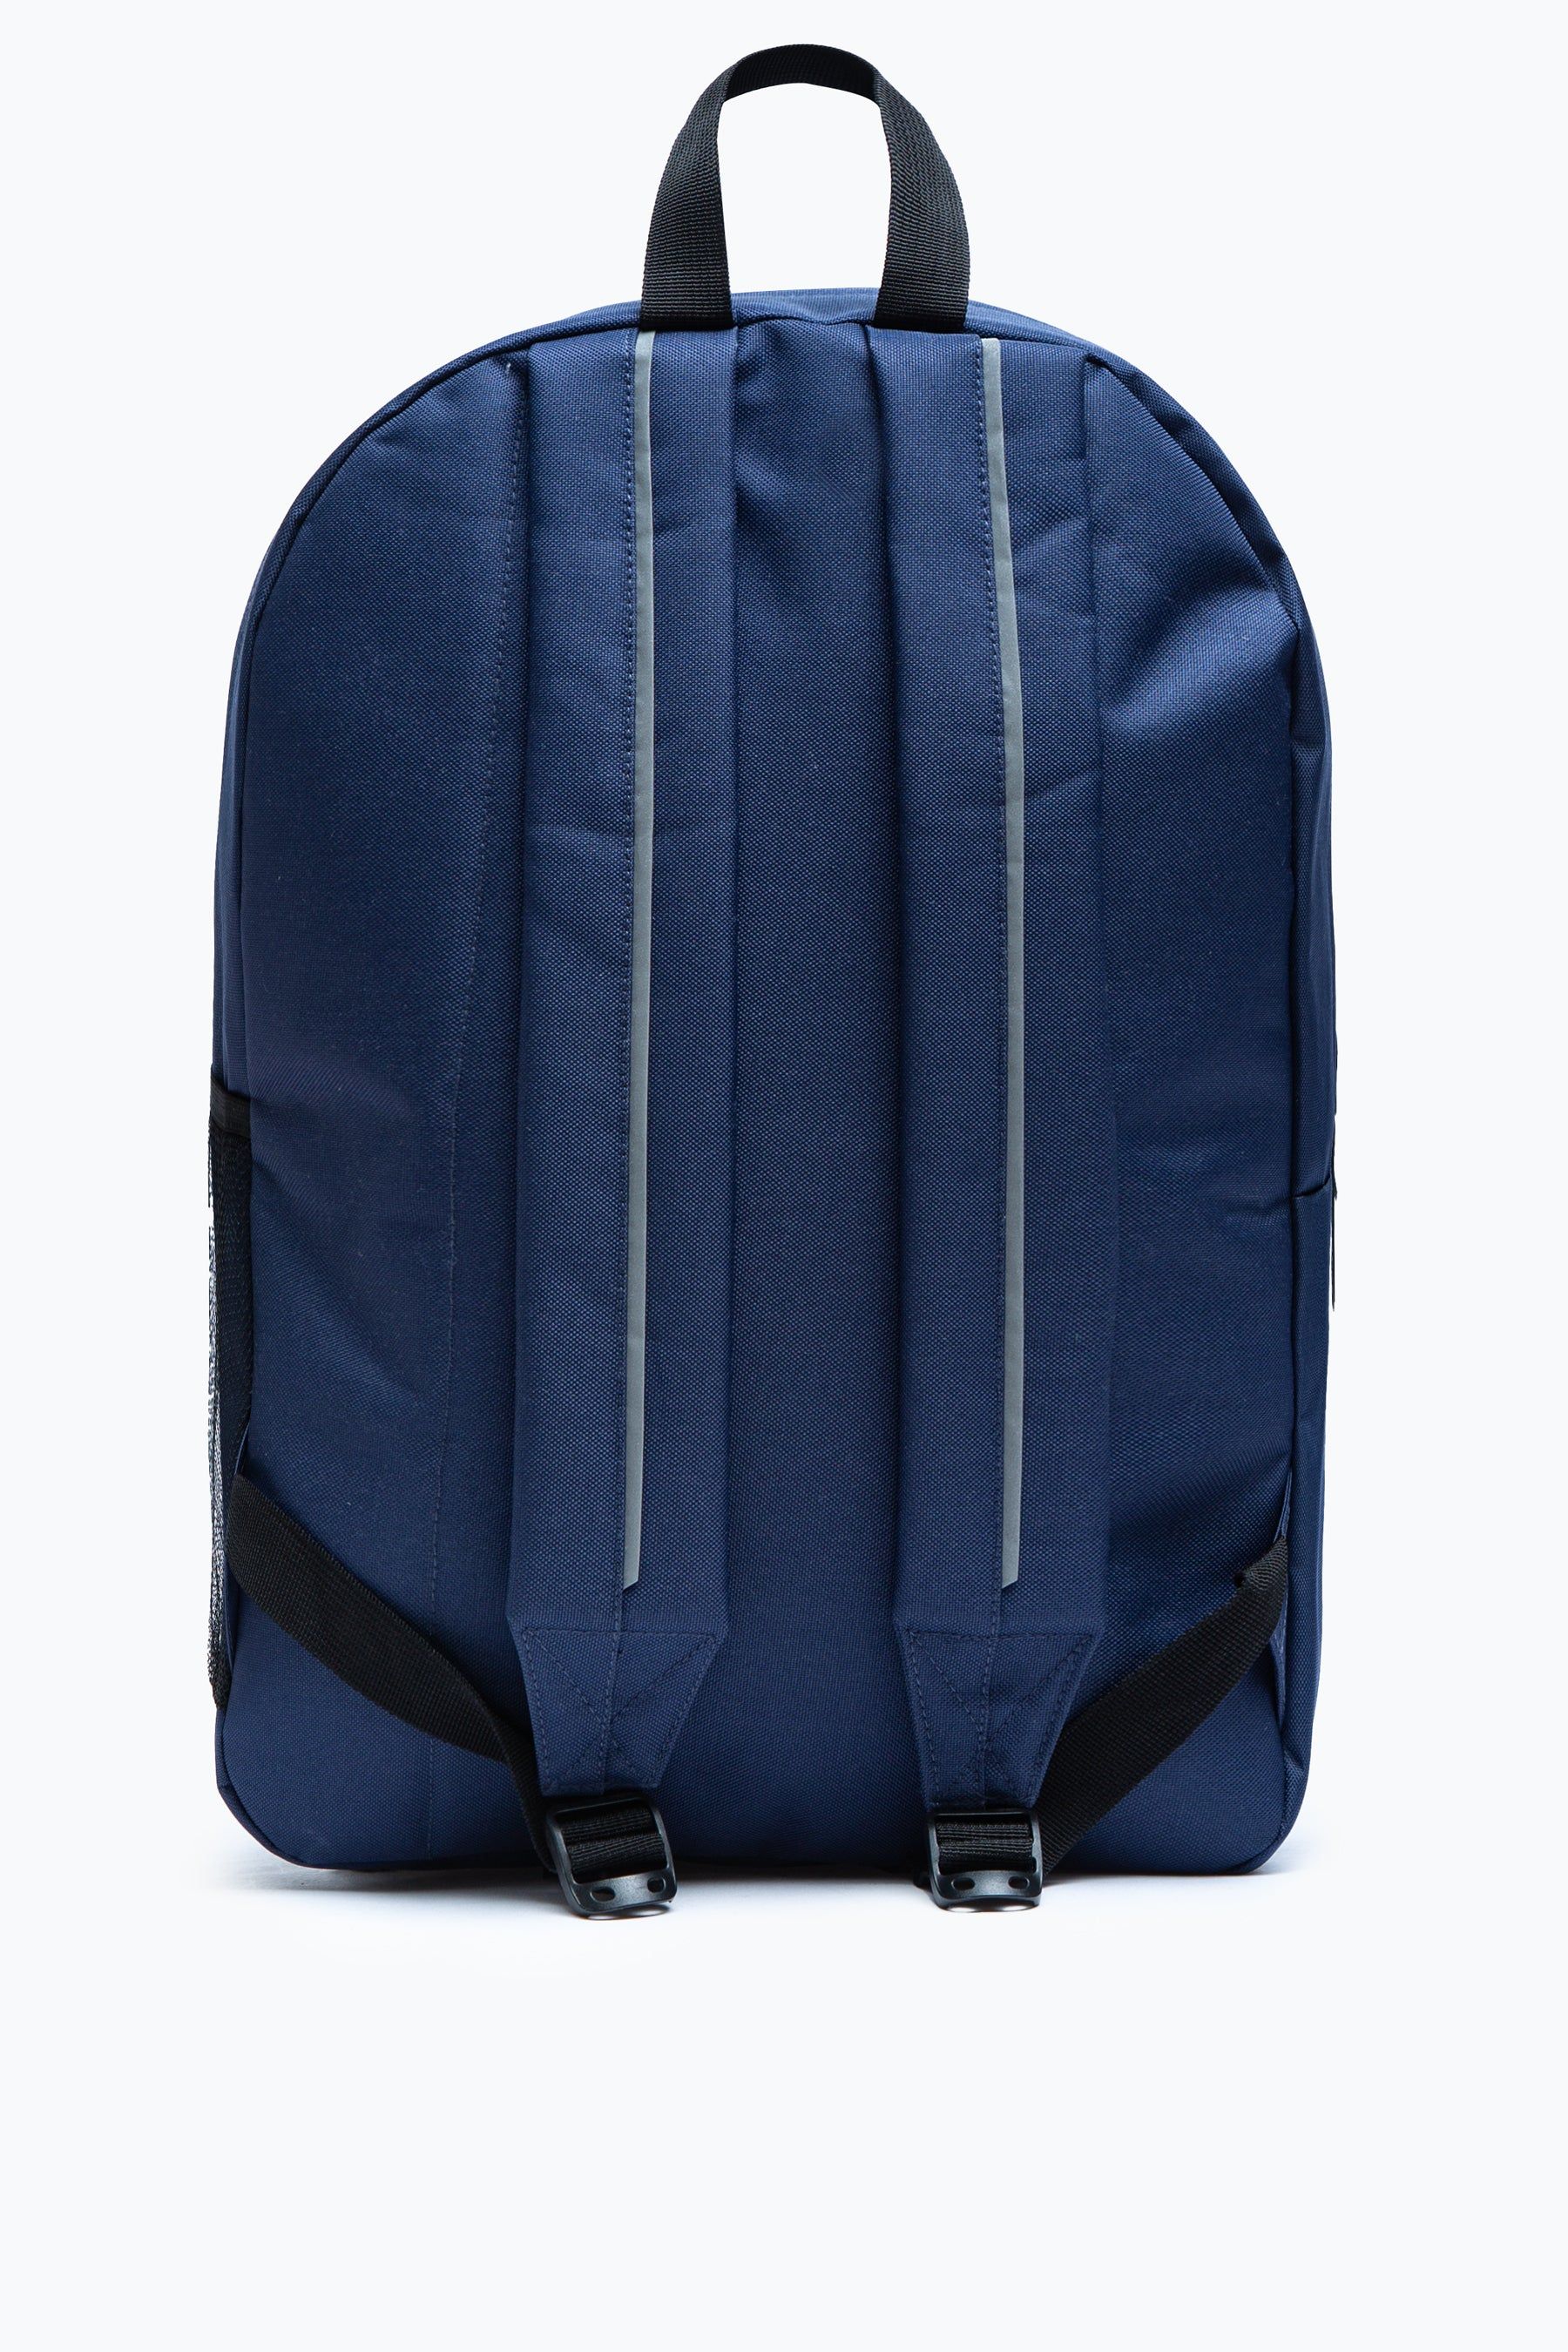 The HYPE. Navy Utility Backpack. Designed in our unisex utility shape, creating a backpack for everyone. Featuring an enlarged front pocket to keep all your essentials, such as snacks, phone charger, lip balms, flip flops. This backpack highlights an elasticated mesh pocket on the side to store your favourite water bottle. The design features an all-over classic black colour palette. Wipe clean only.